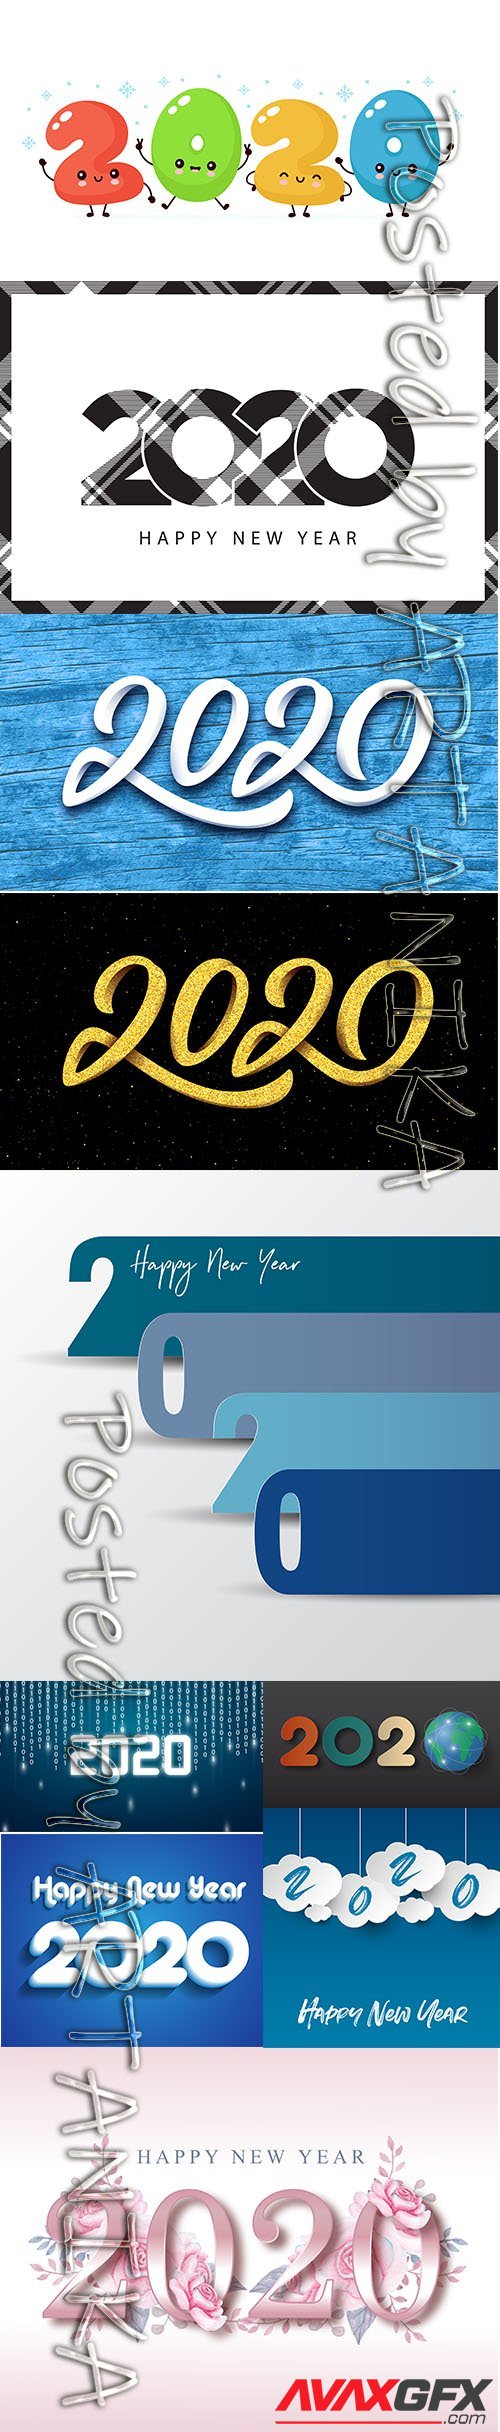 Merry Christmas and New Year 2020 Vector Illustrations Pack Set 12